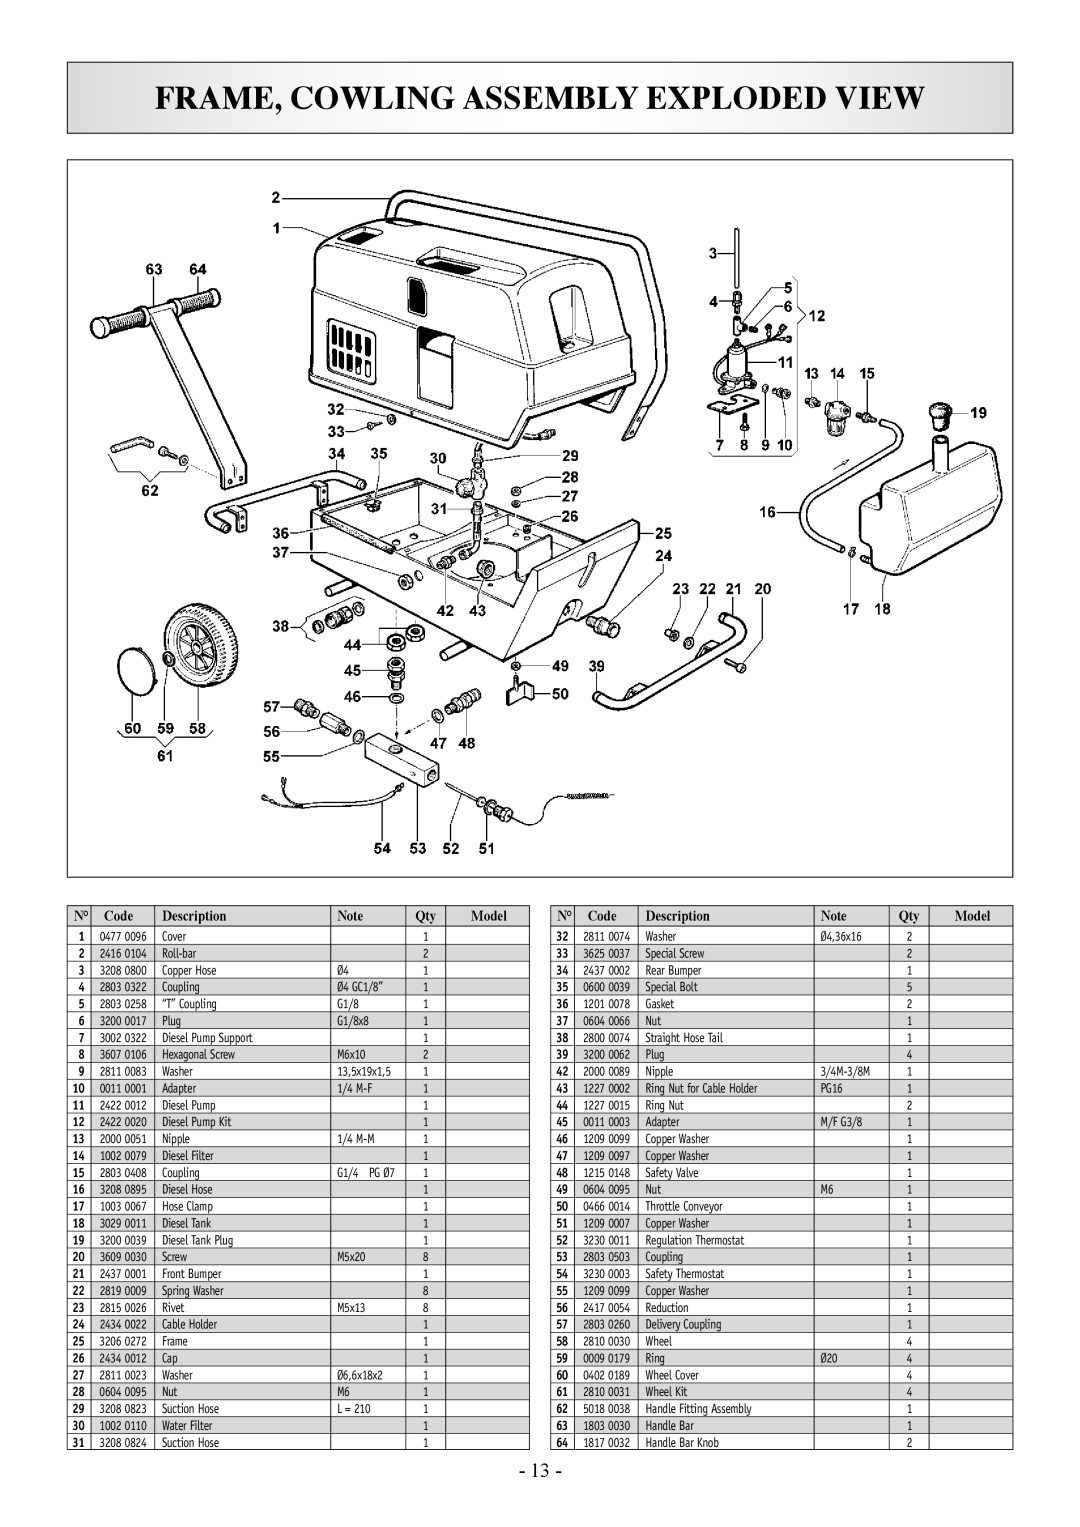 North Star 157394 manual Frame, Cowling Assembly Exploded View, Code, Description, Model 